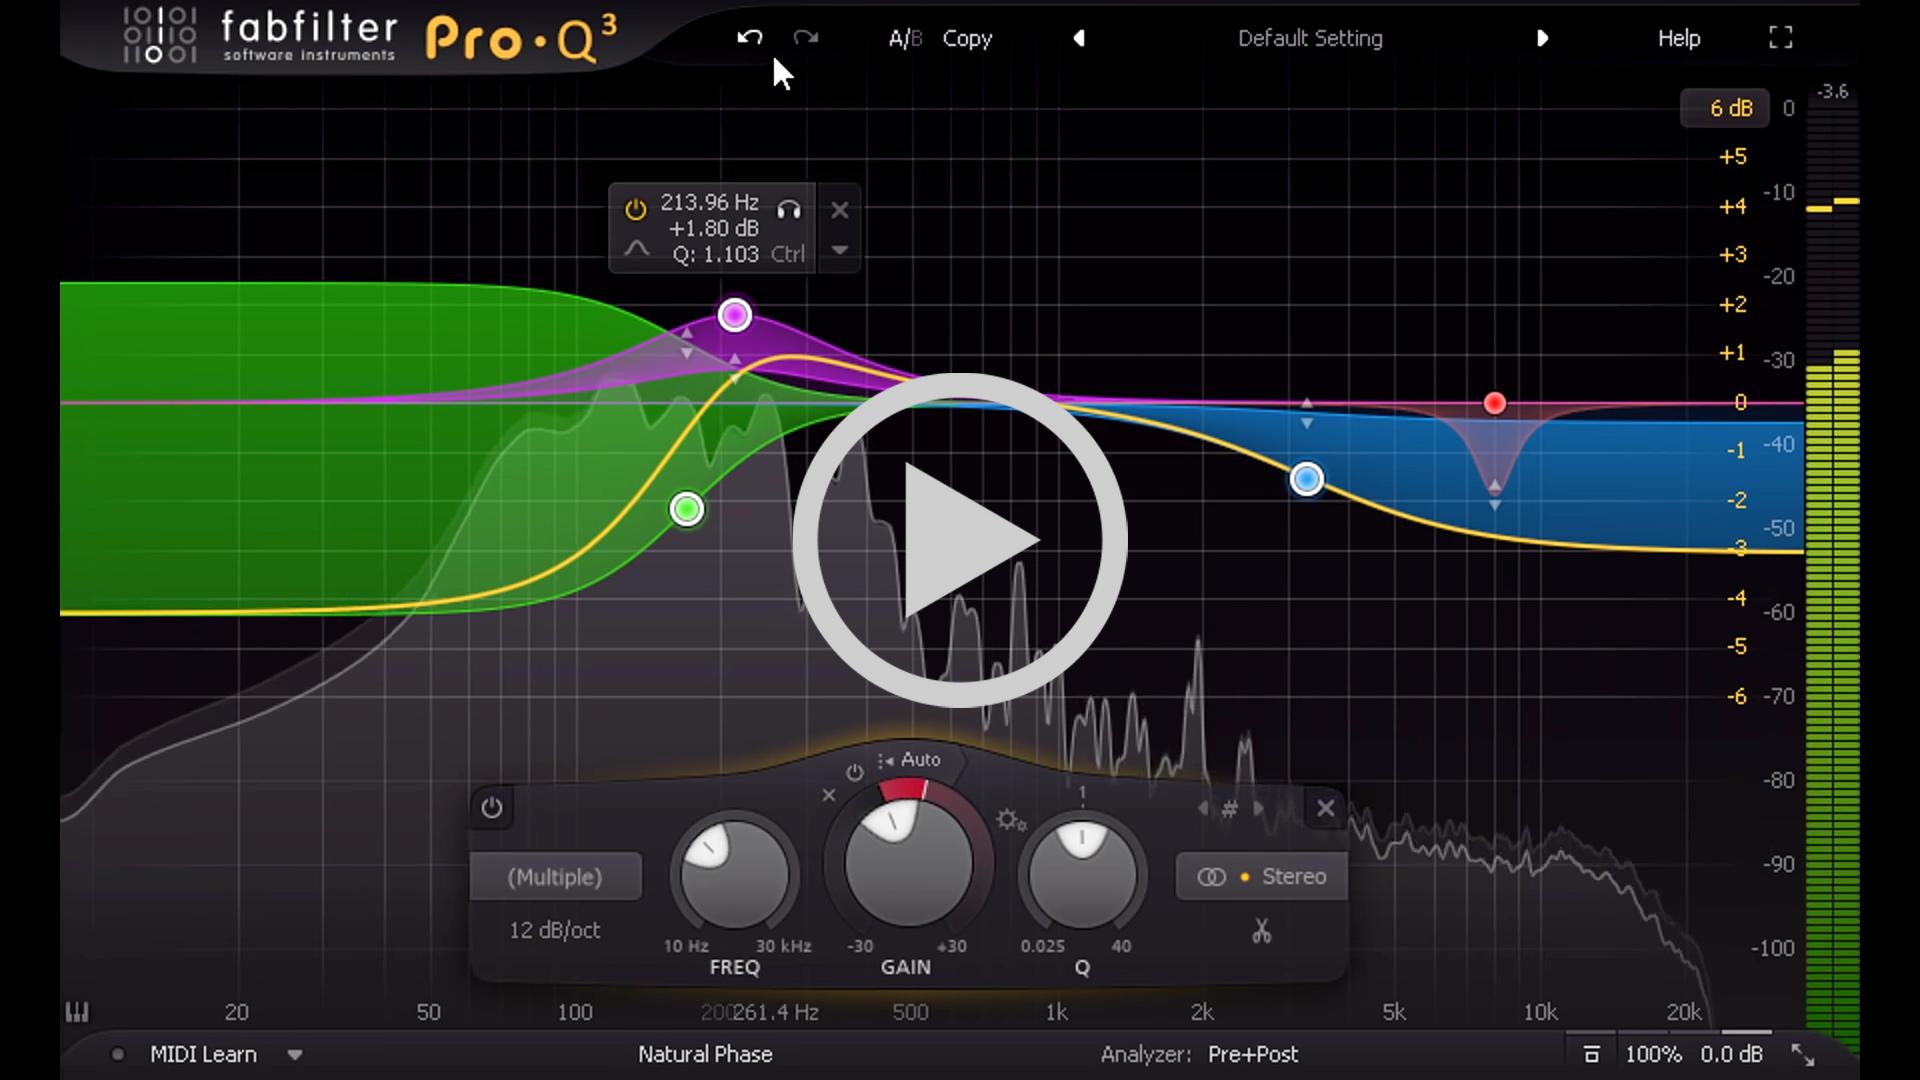 fabfilter pro-q 3 eq and filter plug-in utorrent